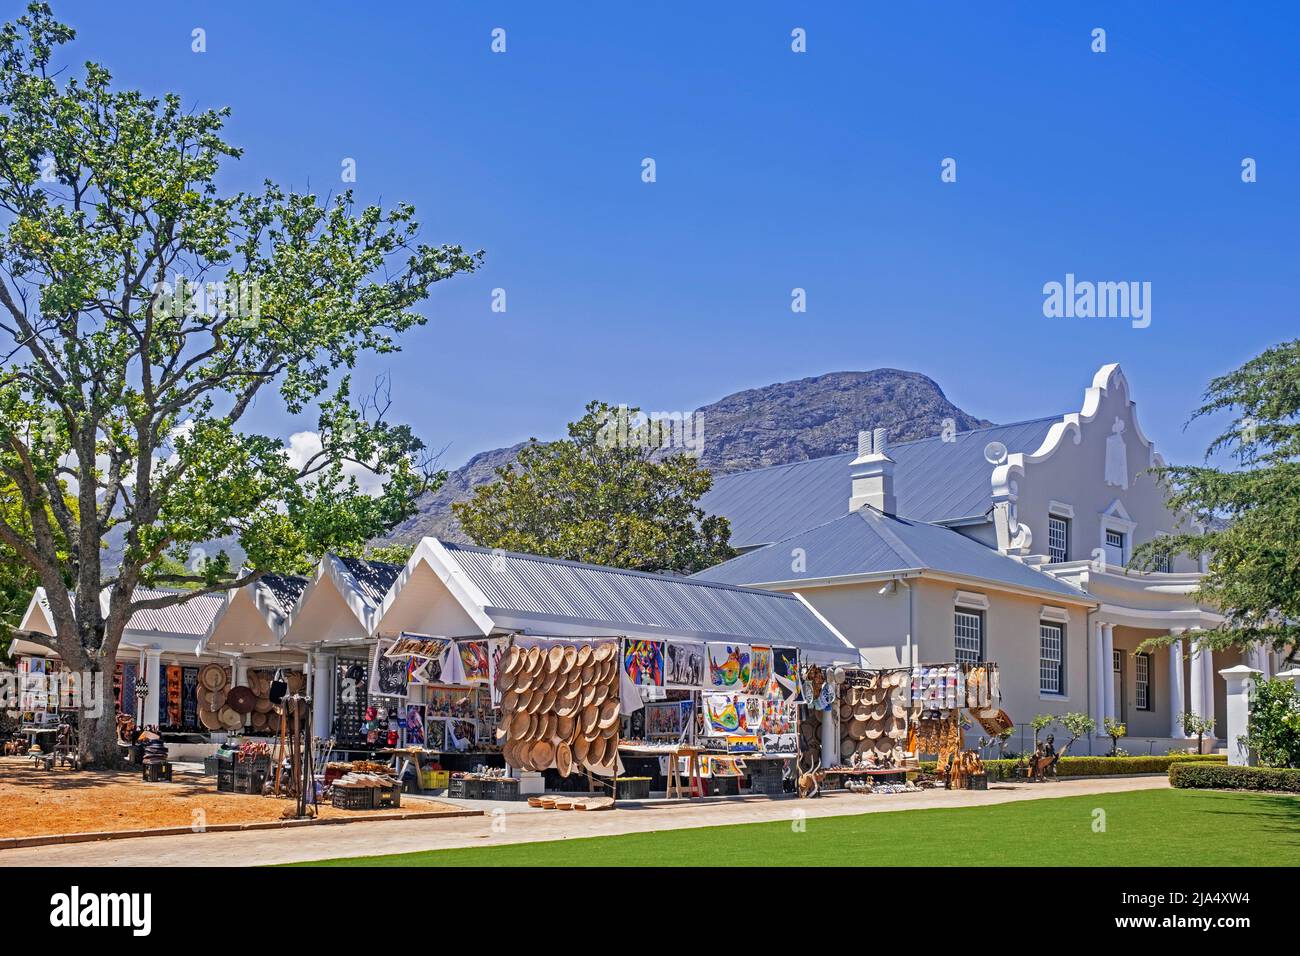 Souvenir stands at the Village Market in the town Franschhoek, Stellenbosch, Cape Winelands, Western Cape Province, South Africa Stock Photo